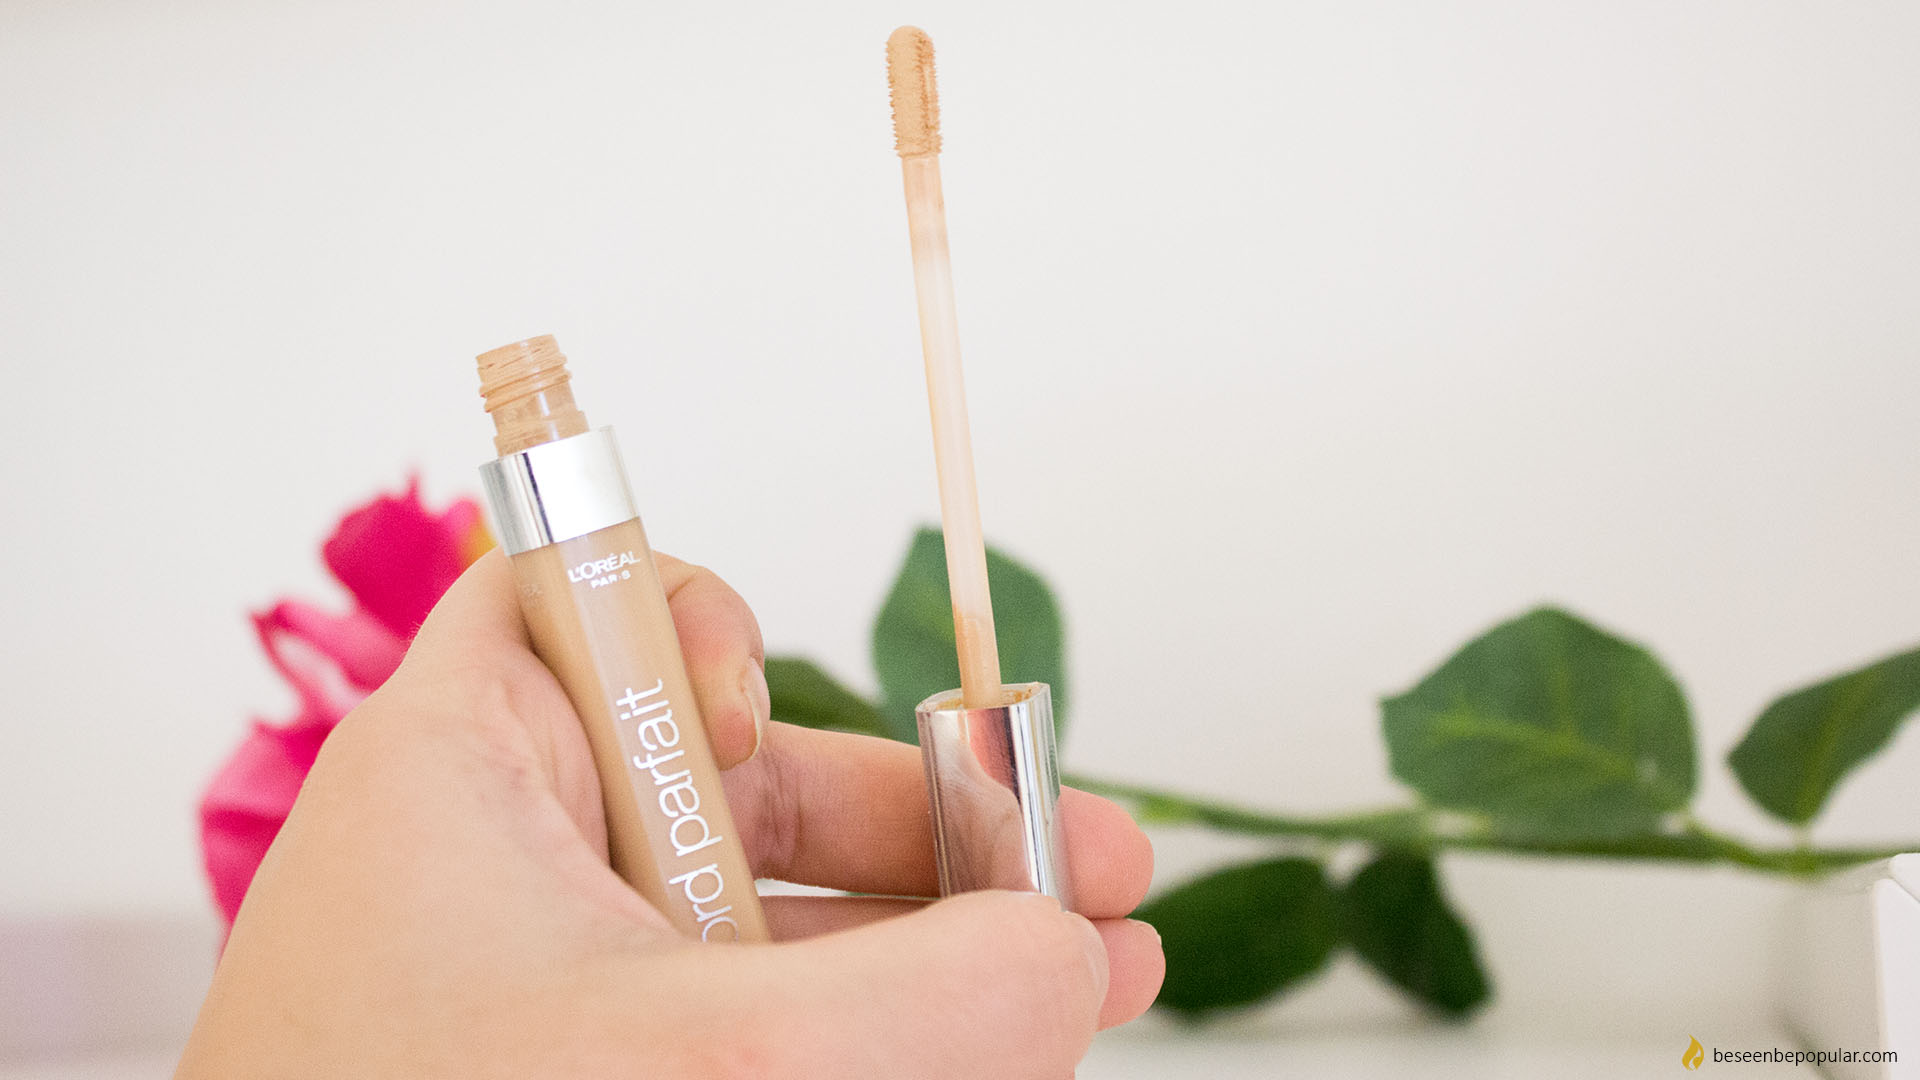 L'Oreal true match concealer - worth the money?